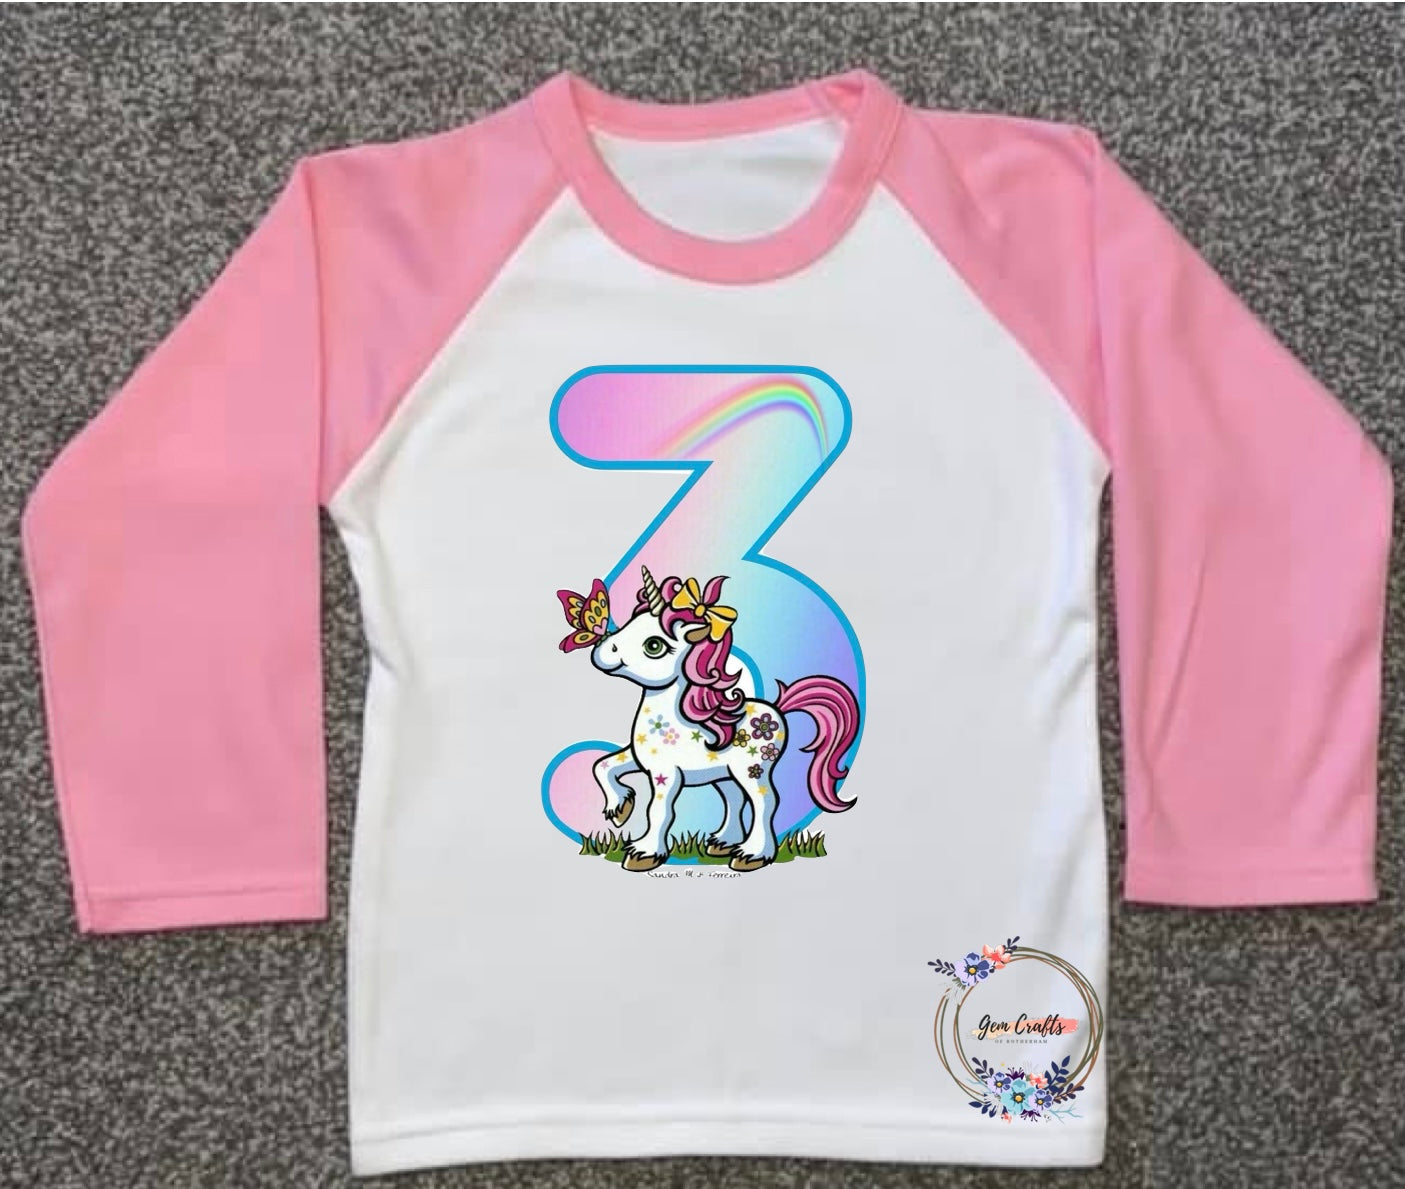 Kids Personalised Unicorn PJs - Plain Pink - Birthday, Ages 6 Months - 10 Years